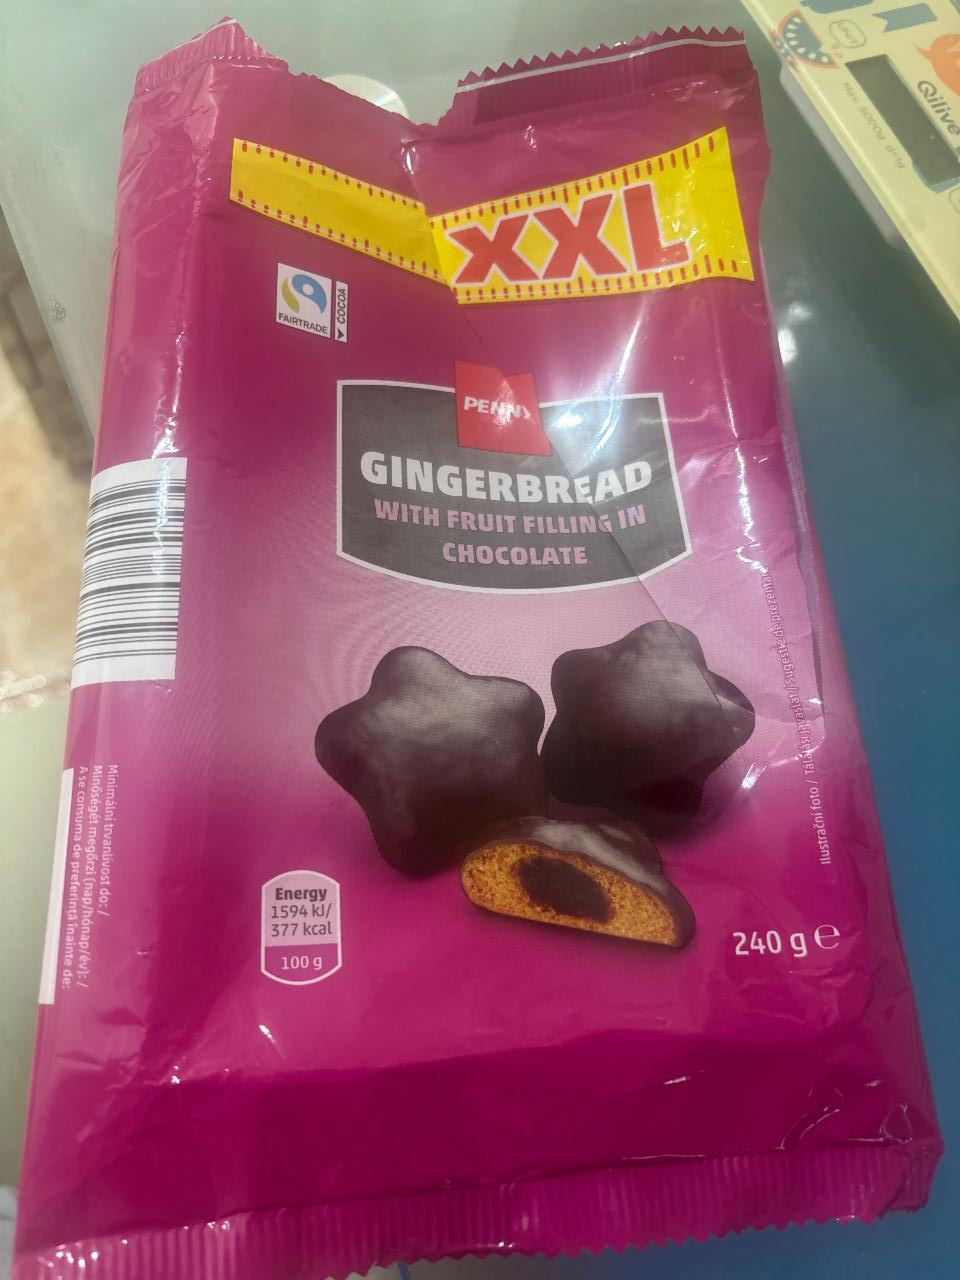 Képek - Gingerbread with fruit filling in chocolate Penny